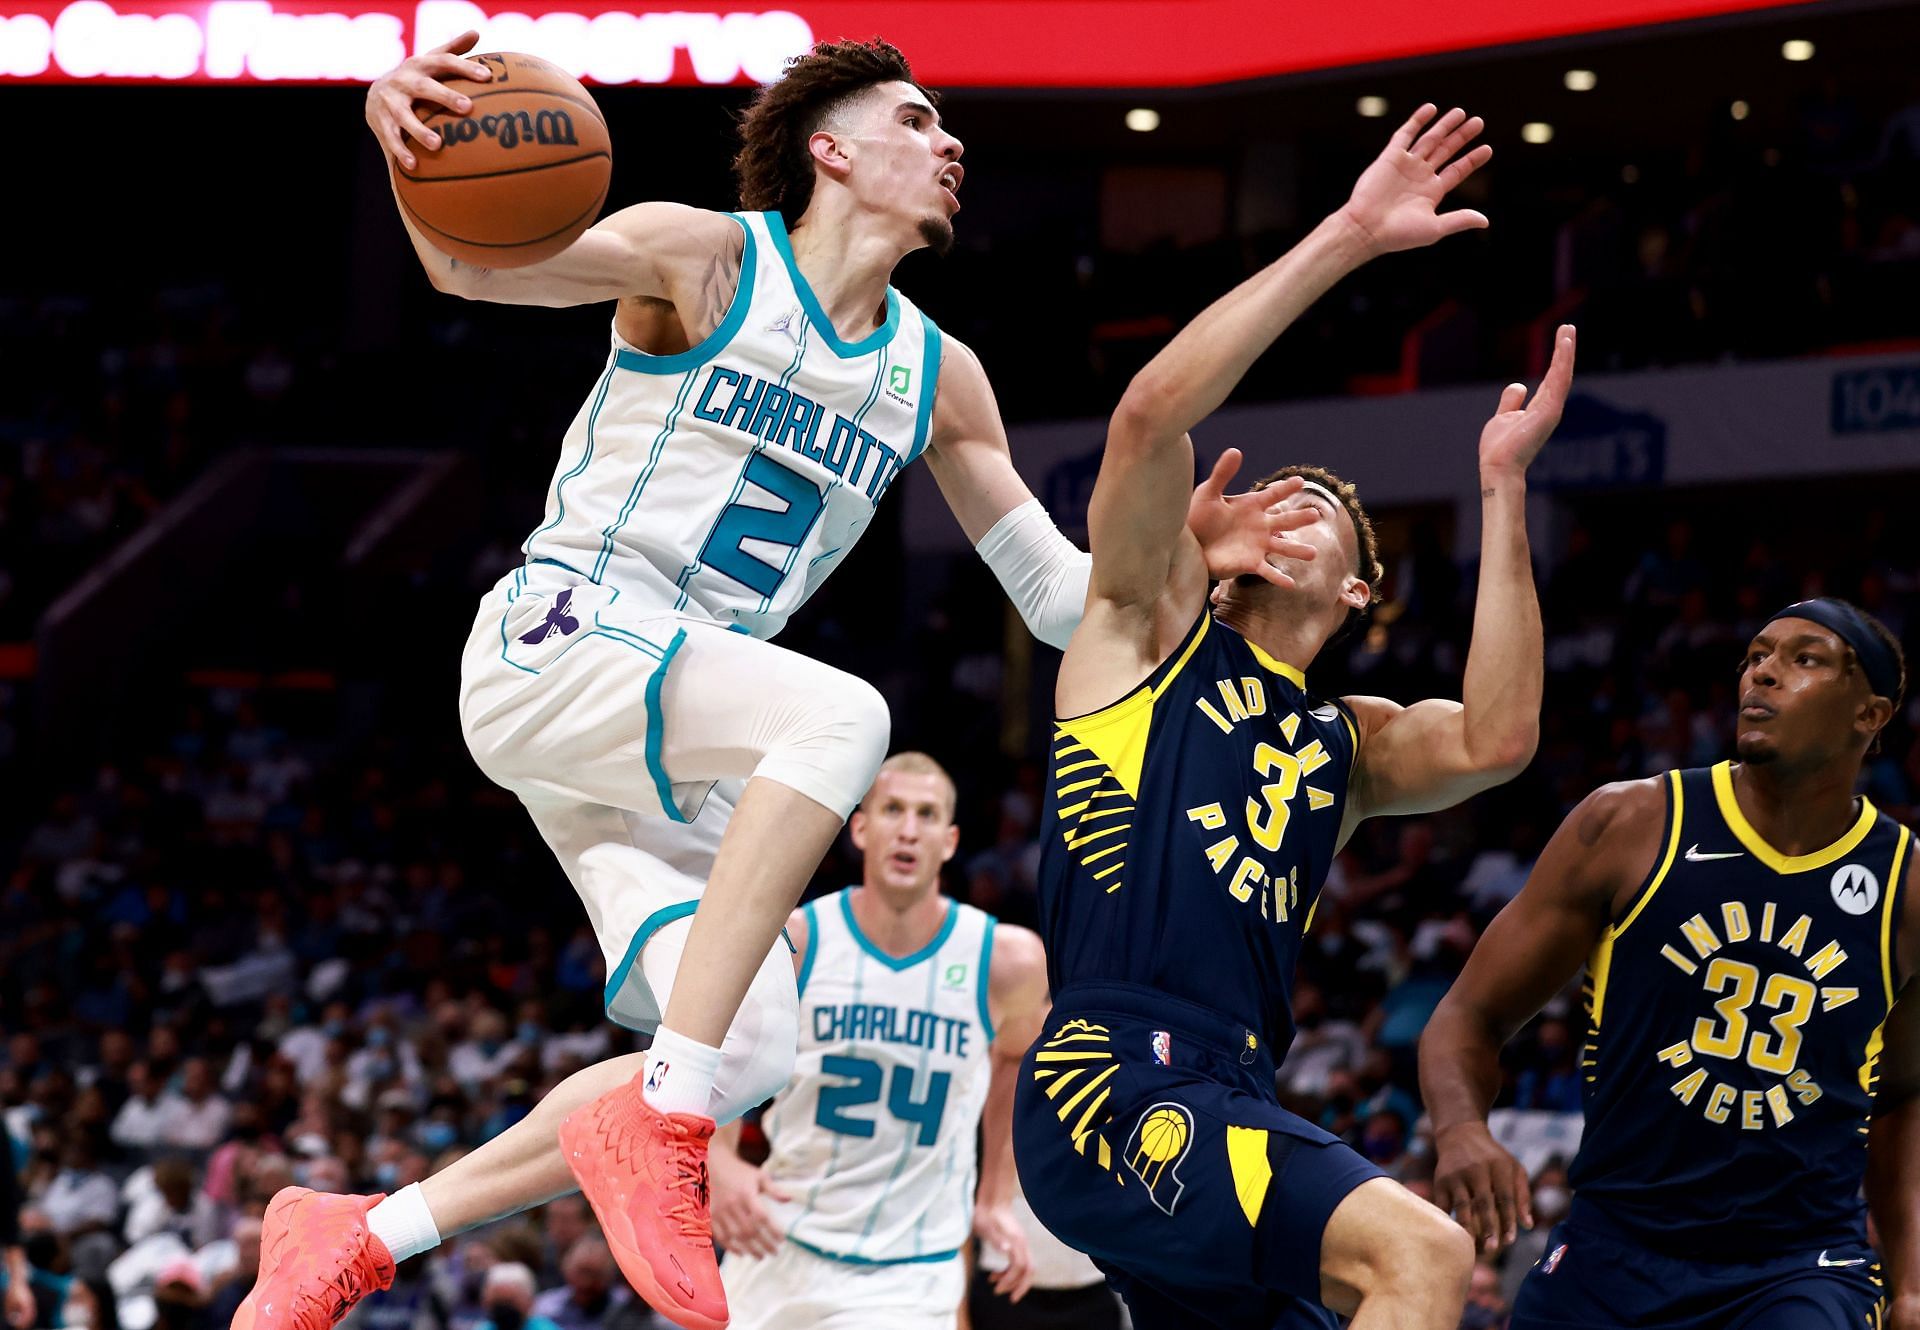 LaMelo Ball of the Charlotte Hornets is going to be a problem for opposing teams, including the Cleveland Cavaliers on Friday